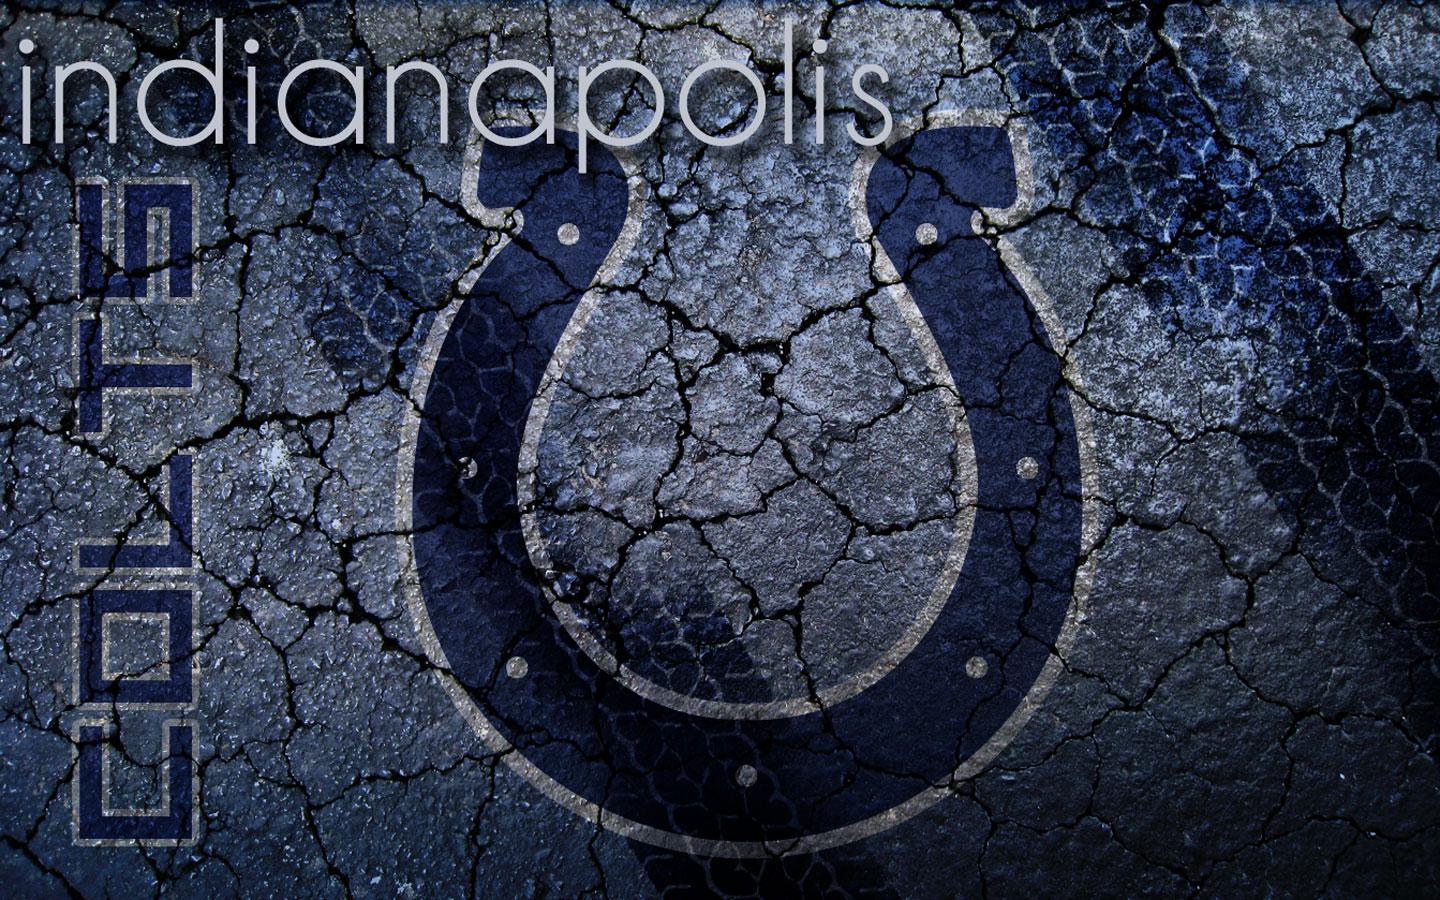 Indianapolis Colts Wallpaper on MarkInternational.info